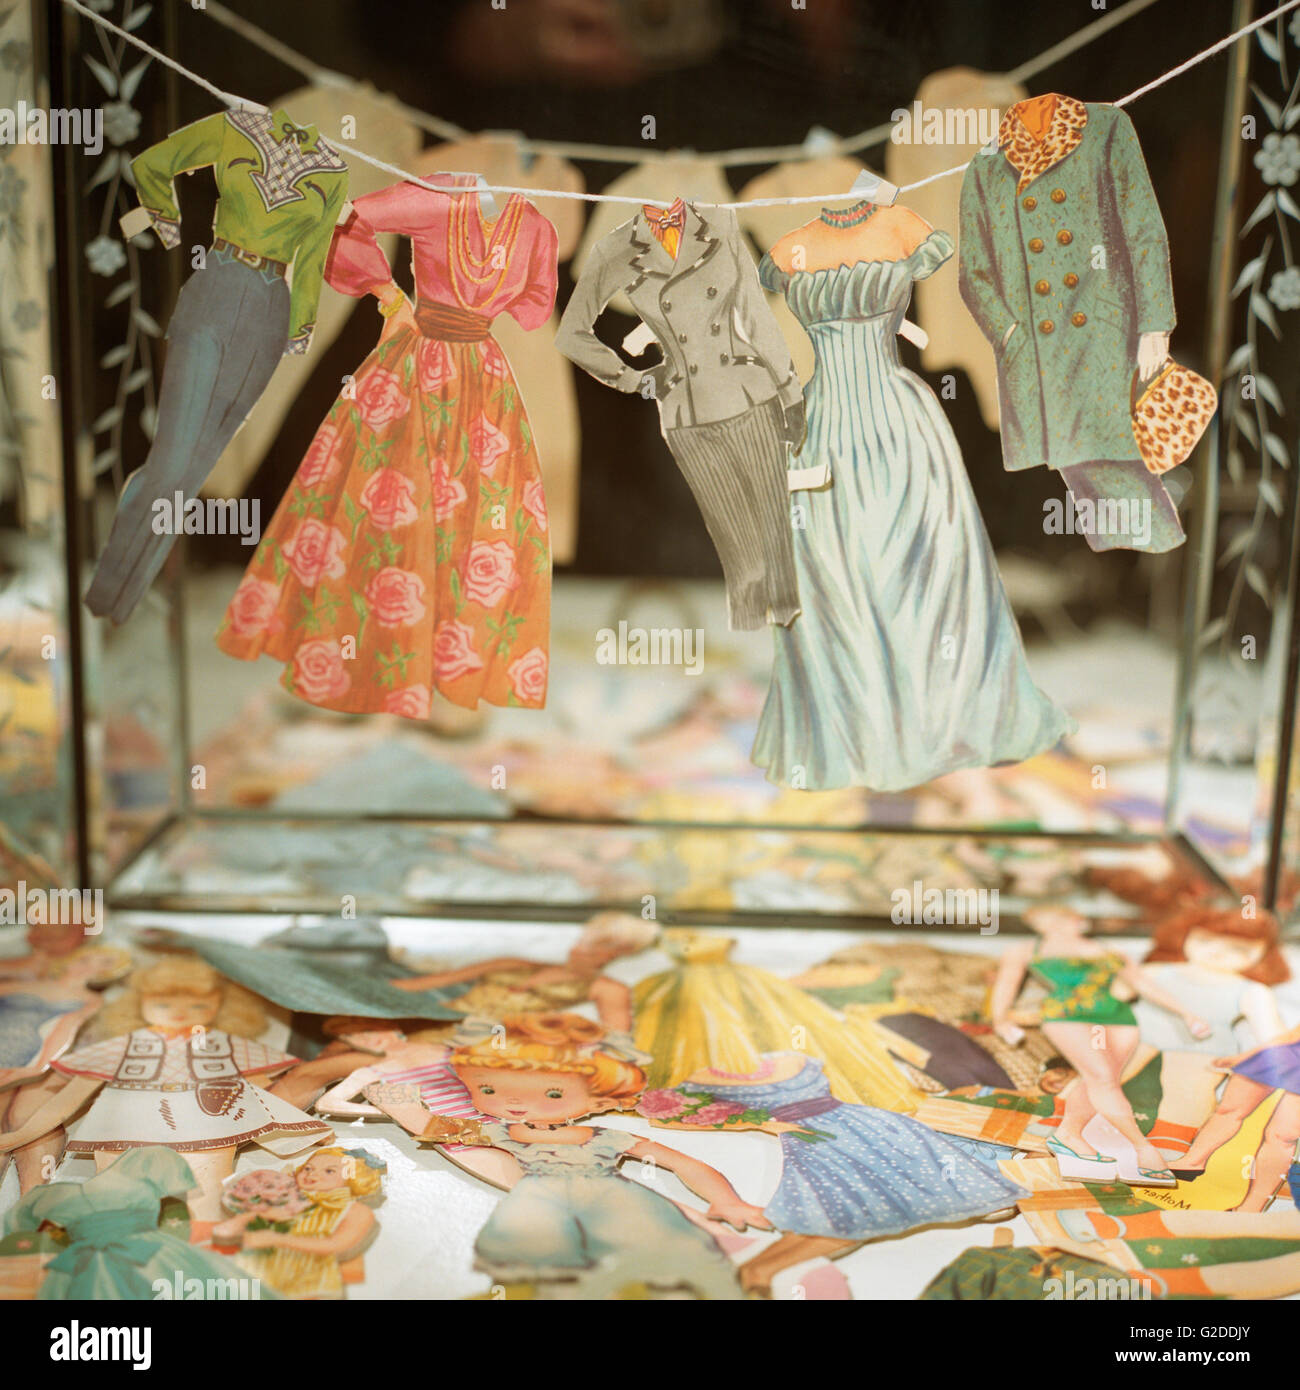 Paper Doll Clothes on Line in Front of Mirror Stock Photo - Alamy